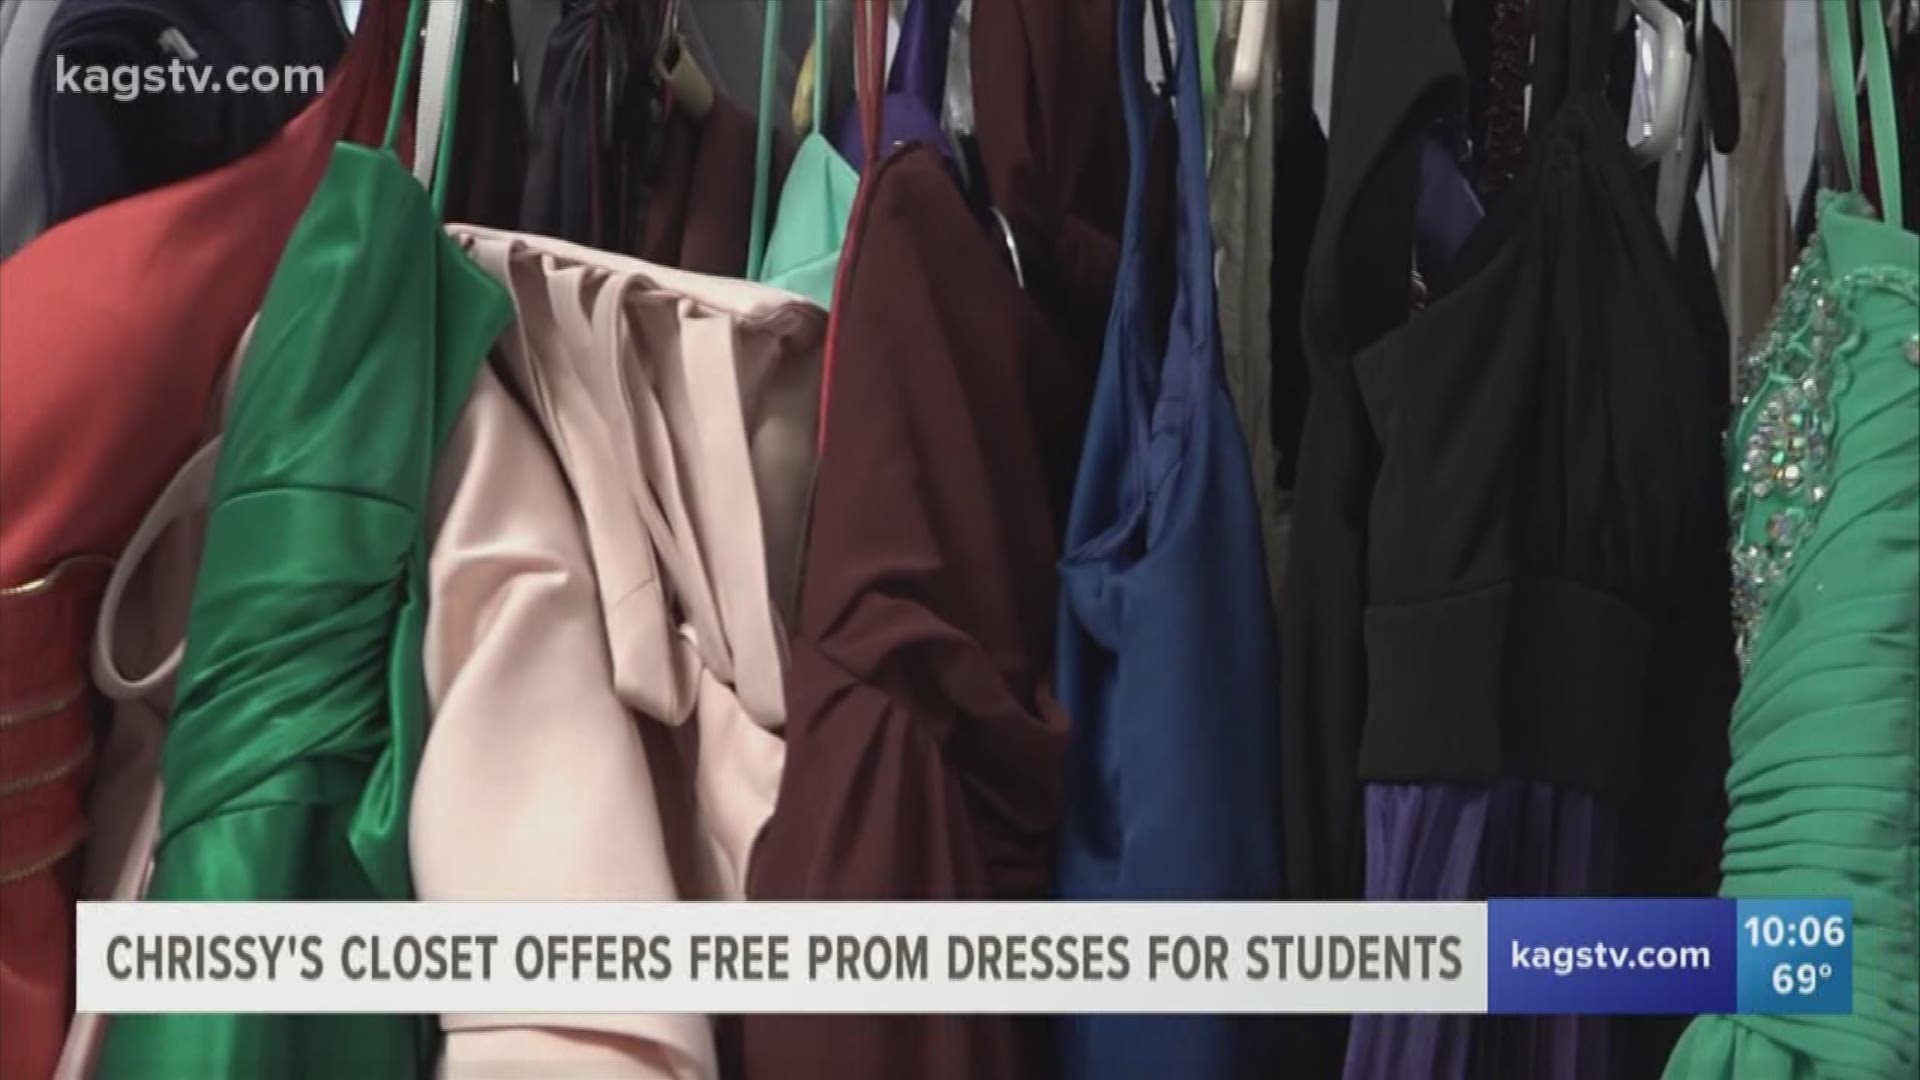 A local organization, Chrissy's Closet, is partnering with College Station ISD to provide free clothing to students and faculty. Now, as prom season approaches, they are also offering formal wear.